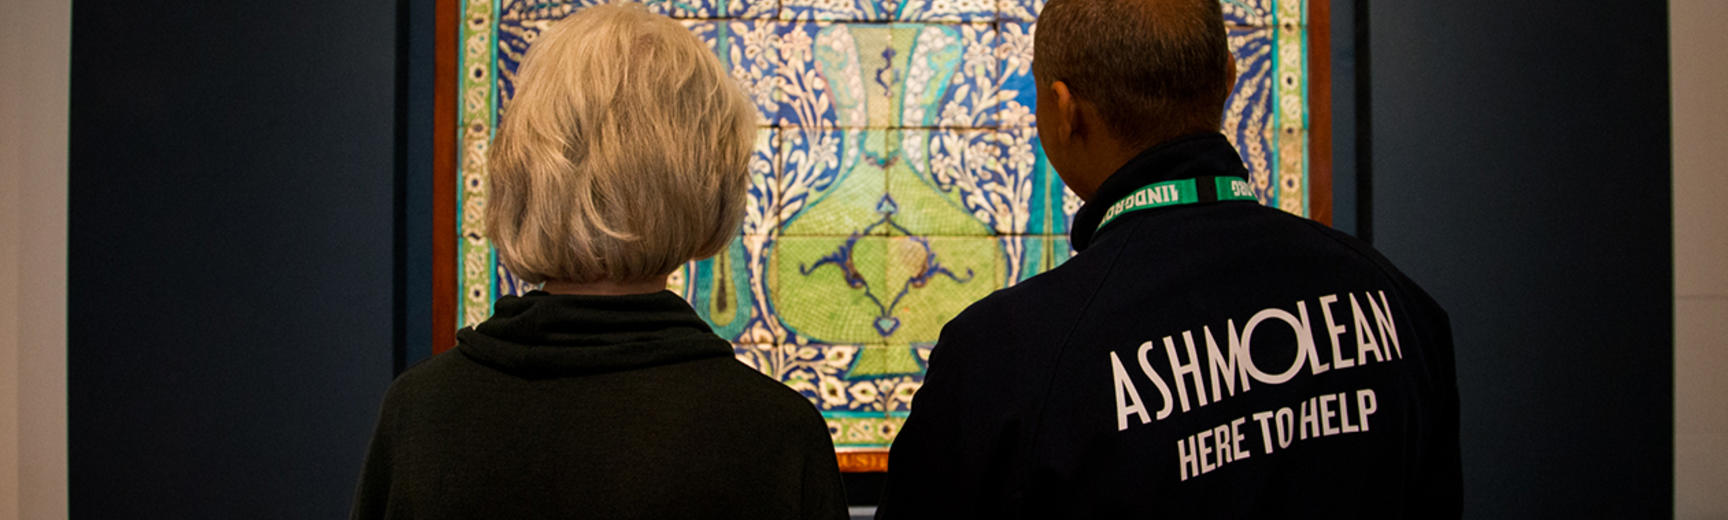 A visitor engagement assistant is telling a visitor some information about the Islamic Tiles in front of them